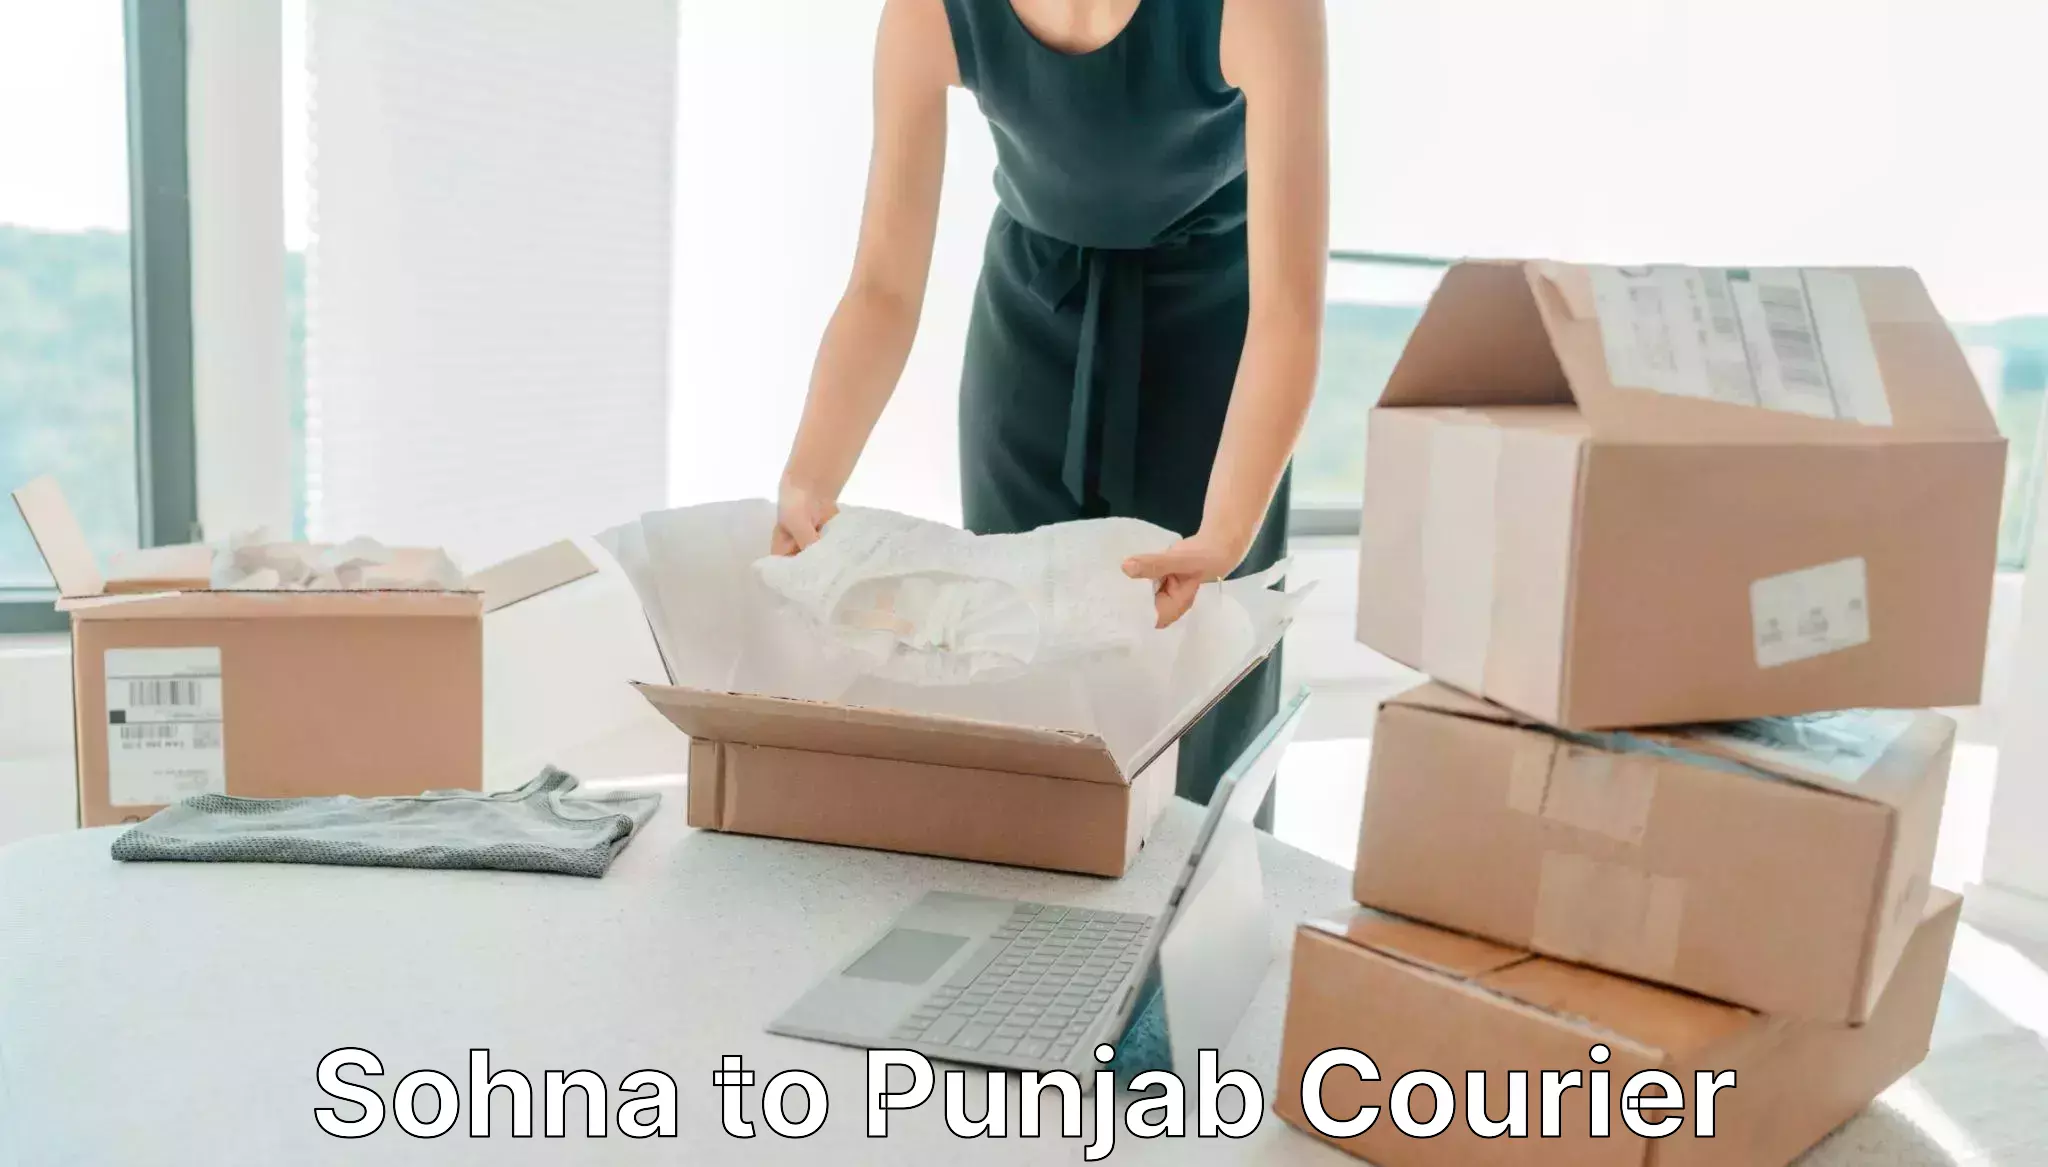 Modern delivery technologies Sohna to Punjab